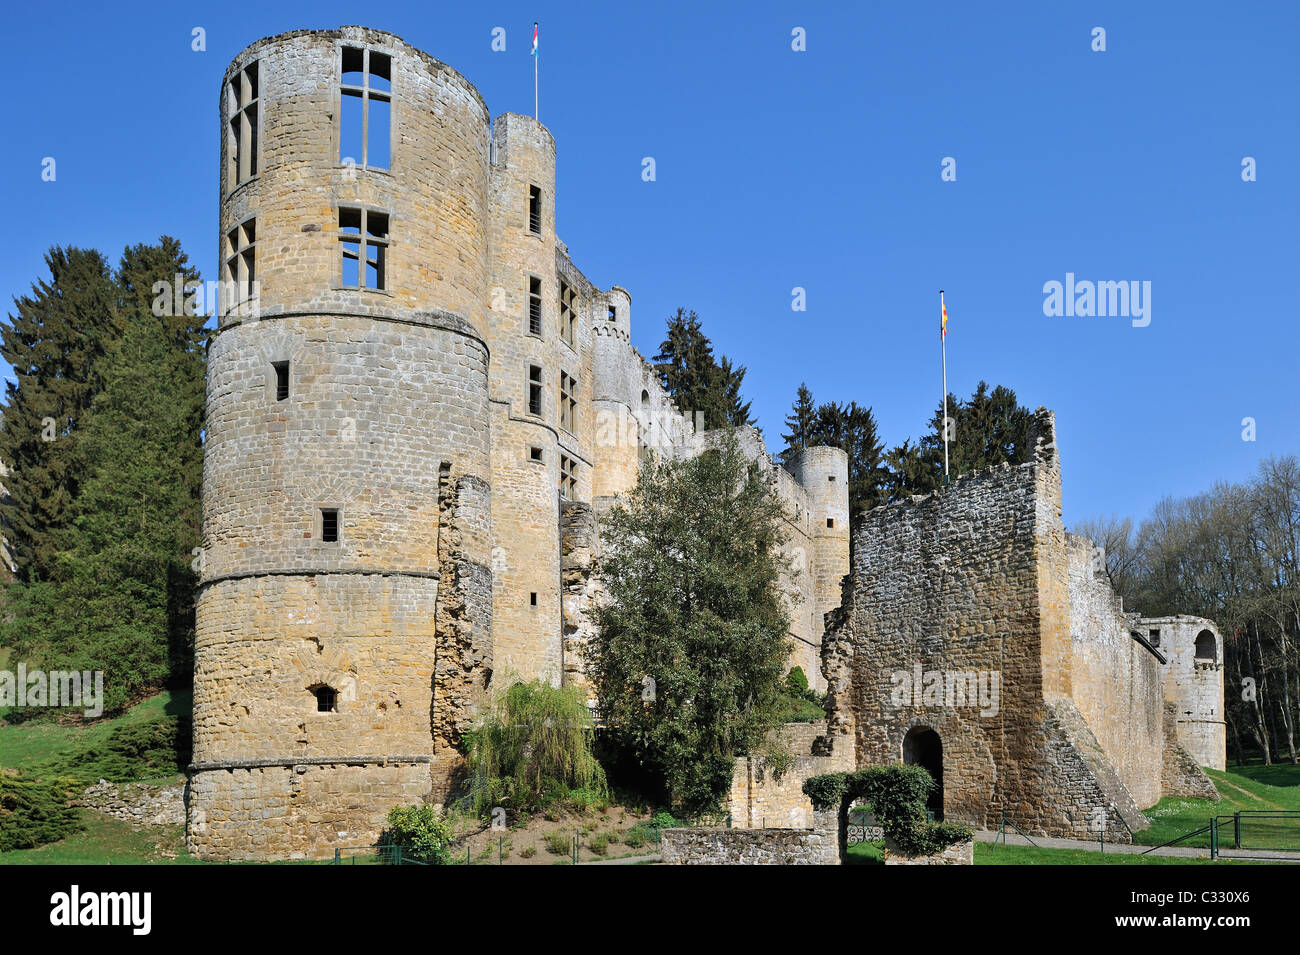 Ruins of the medieval fortress Beaufort Castle in Little Switzerland / Mullerthal, Grand Duchy of Luxembourg Stock Photo